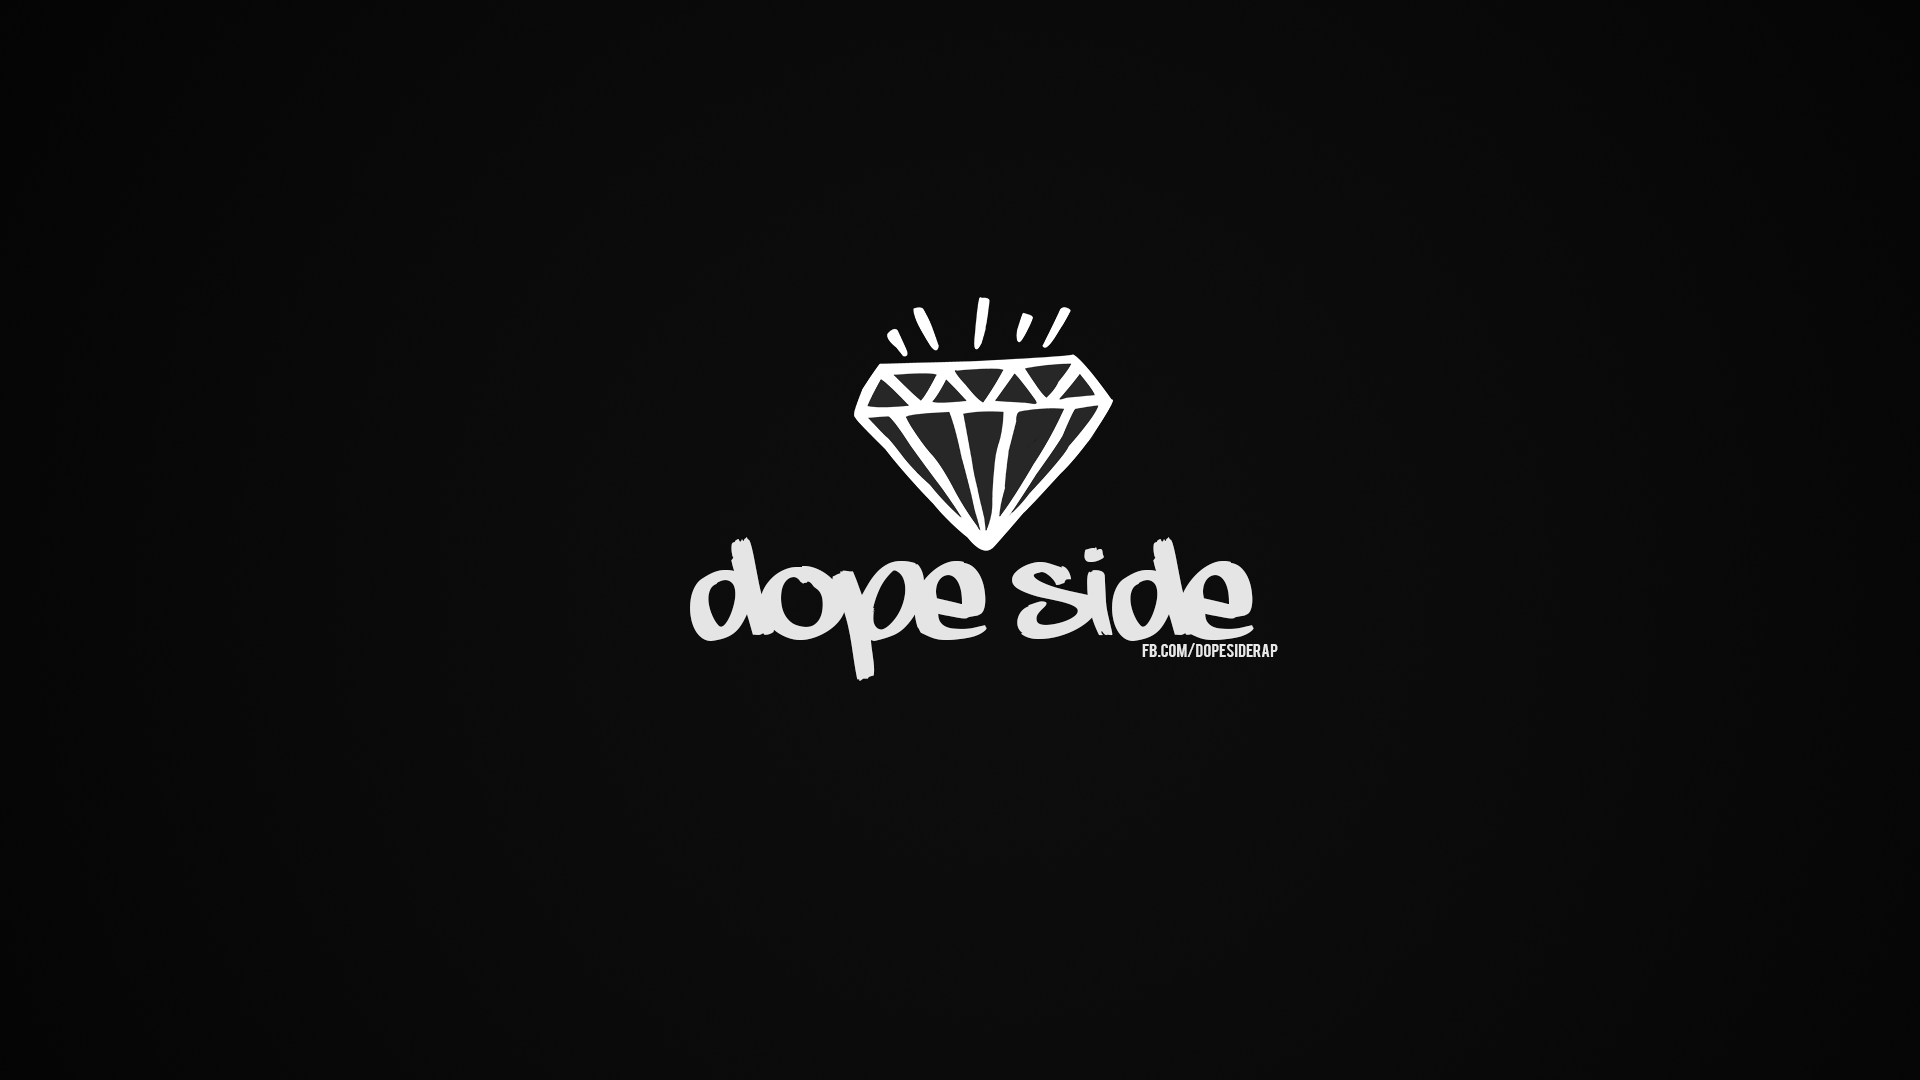 DOPE WALLPAPERS FREE Wallpapers Background images   hippowallpapers 1920x1080